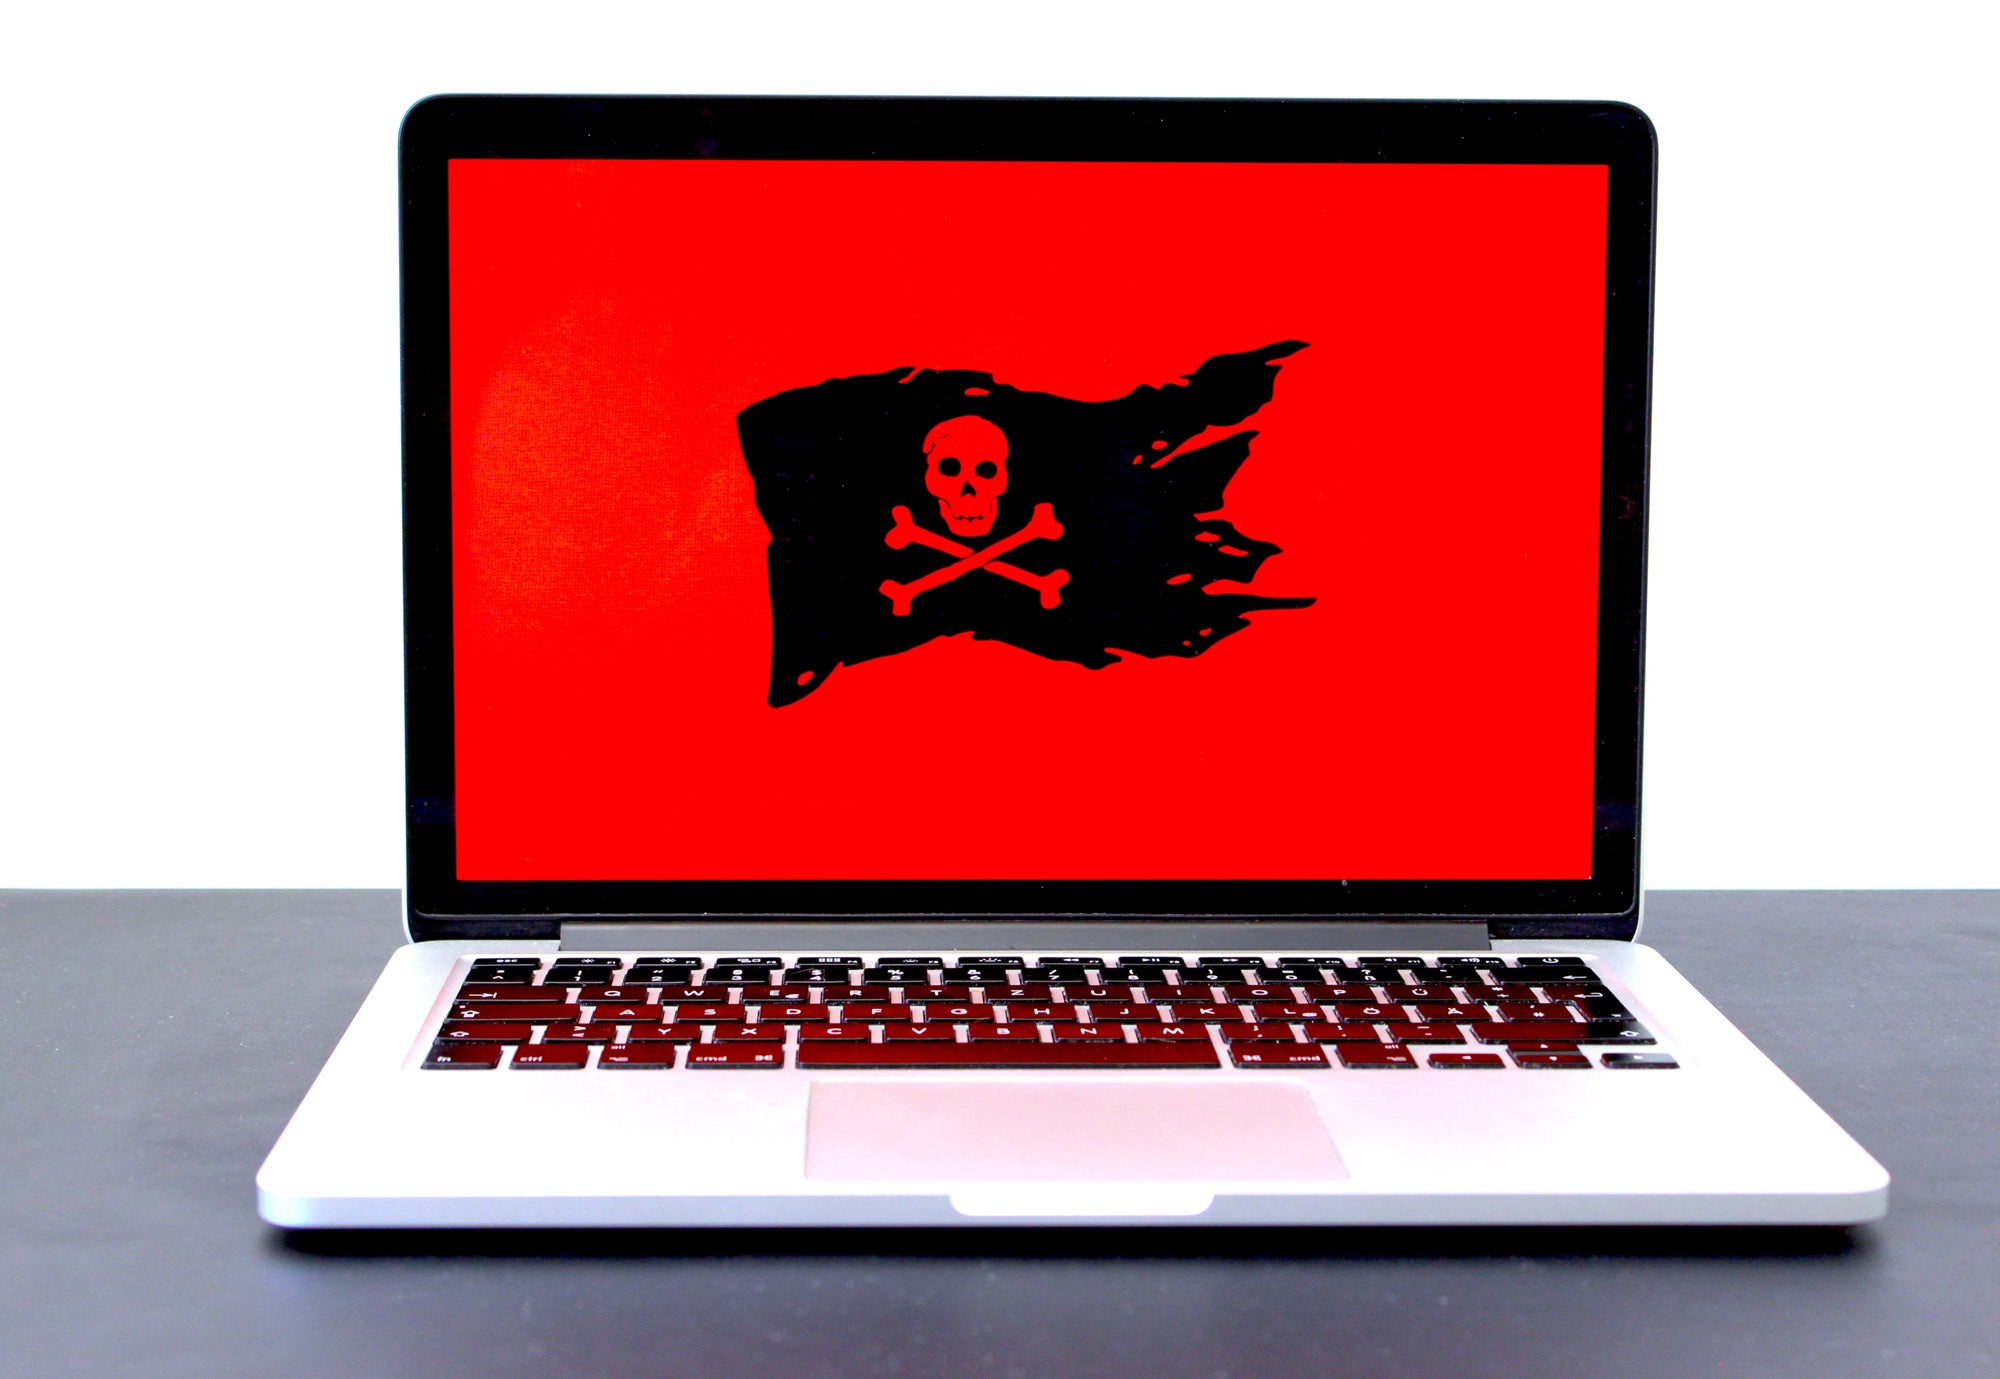 The Top 10 Ransomware Types Hitting Businesses in 2019